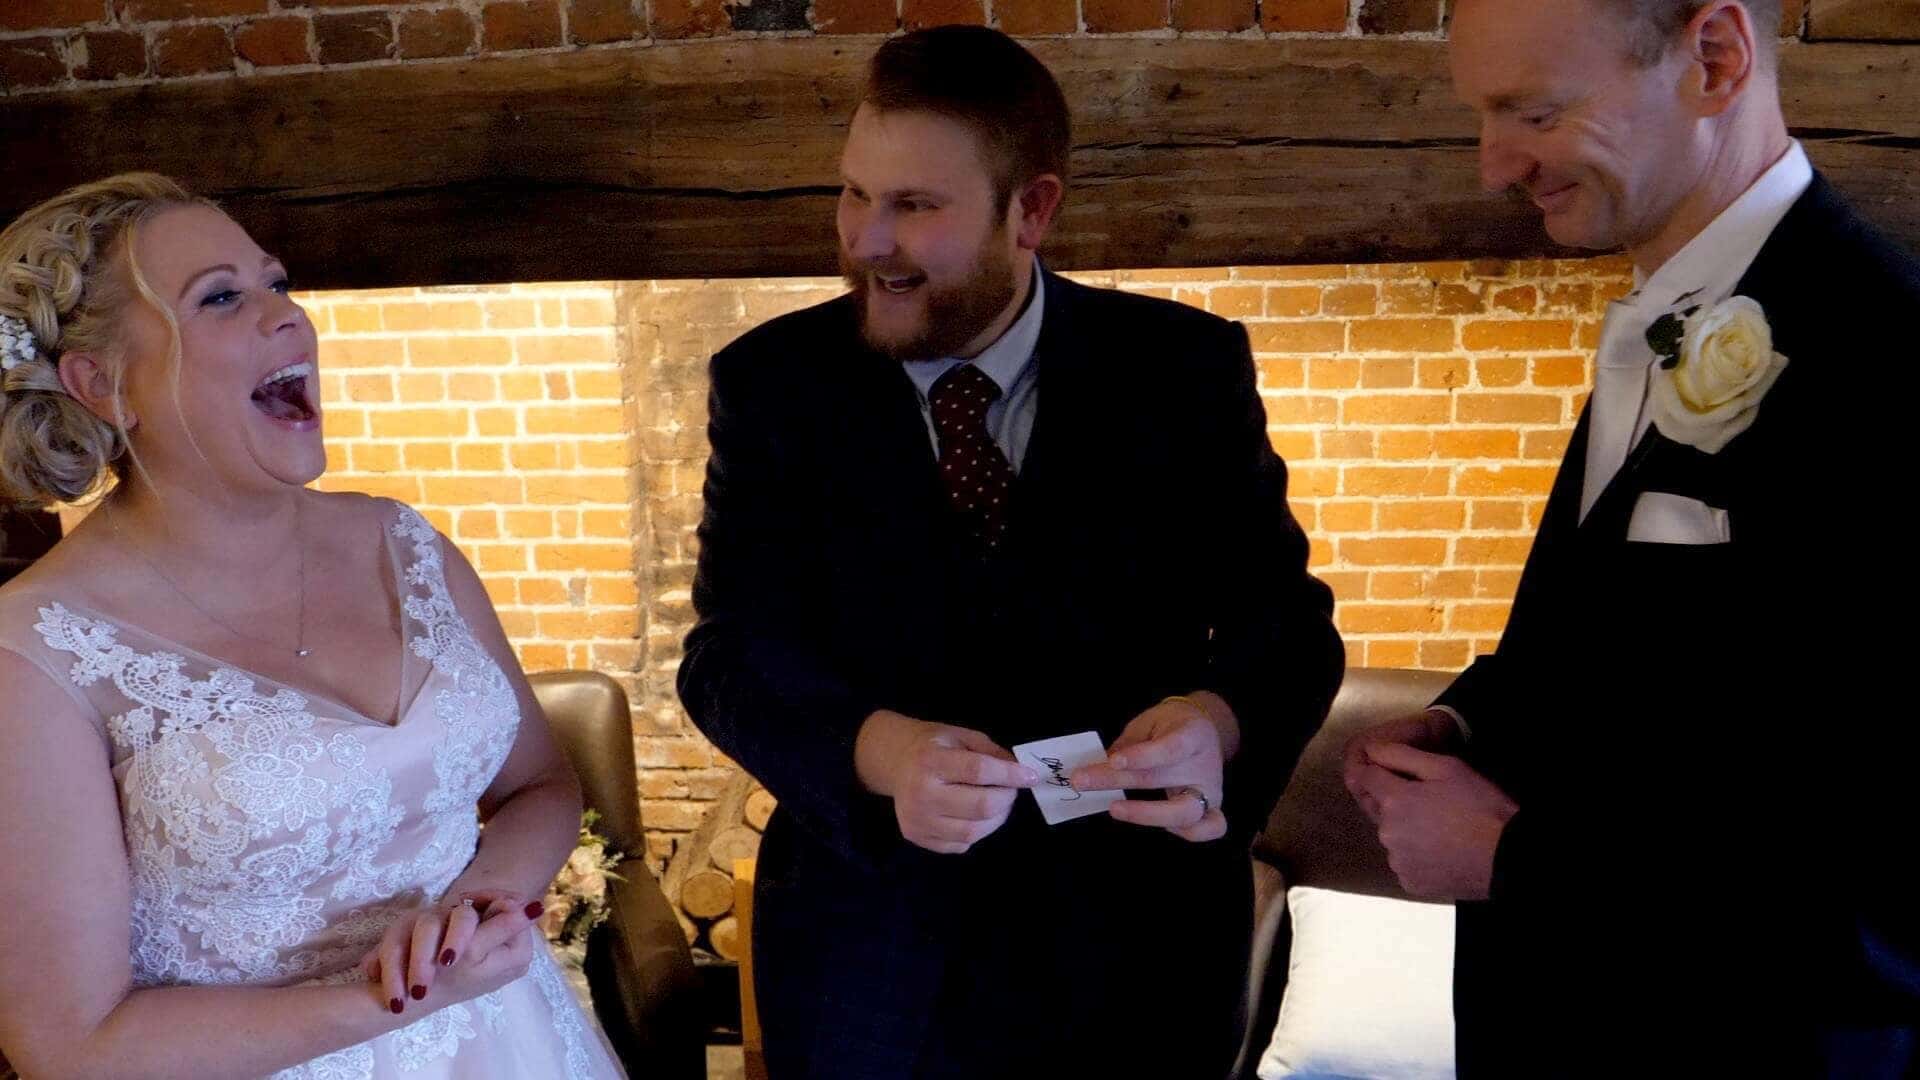 Wedding Magician Trick at the reception